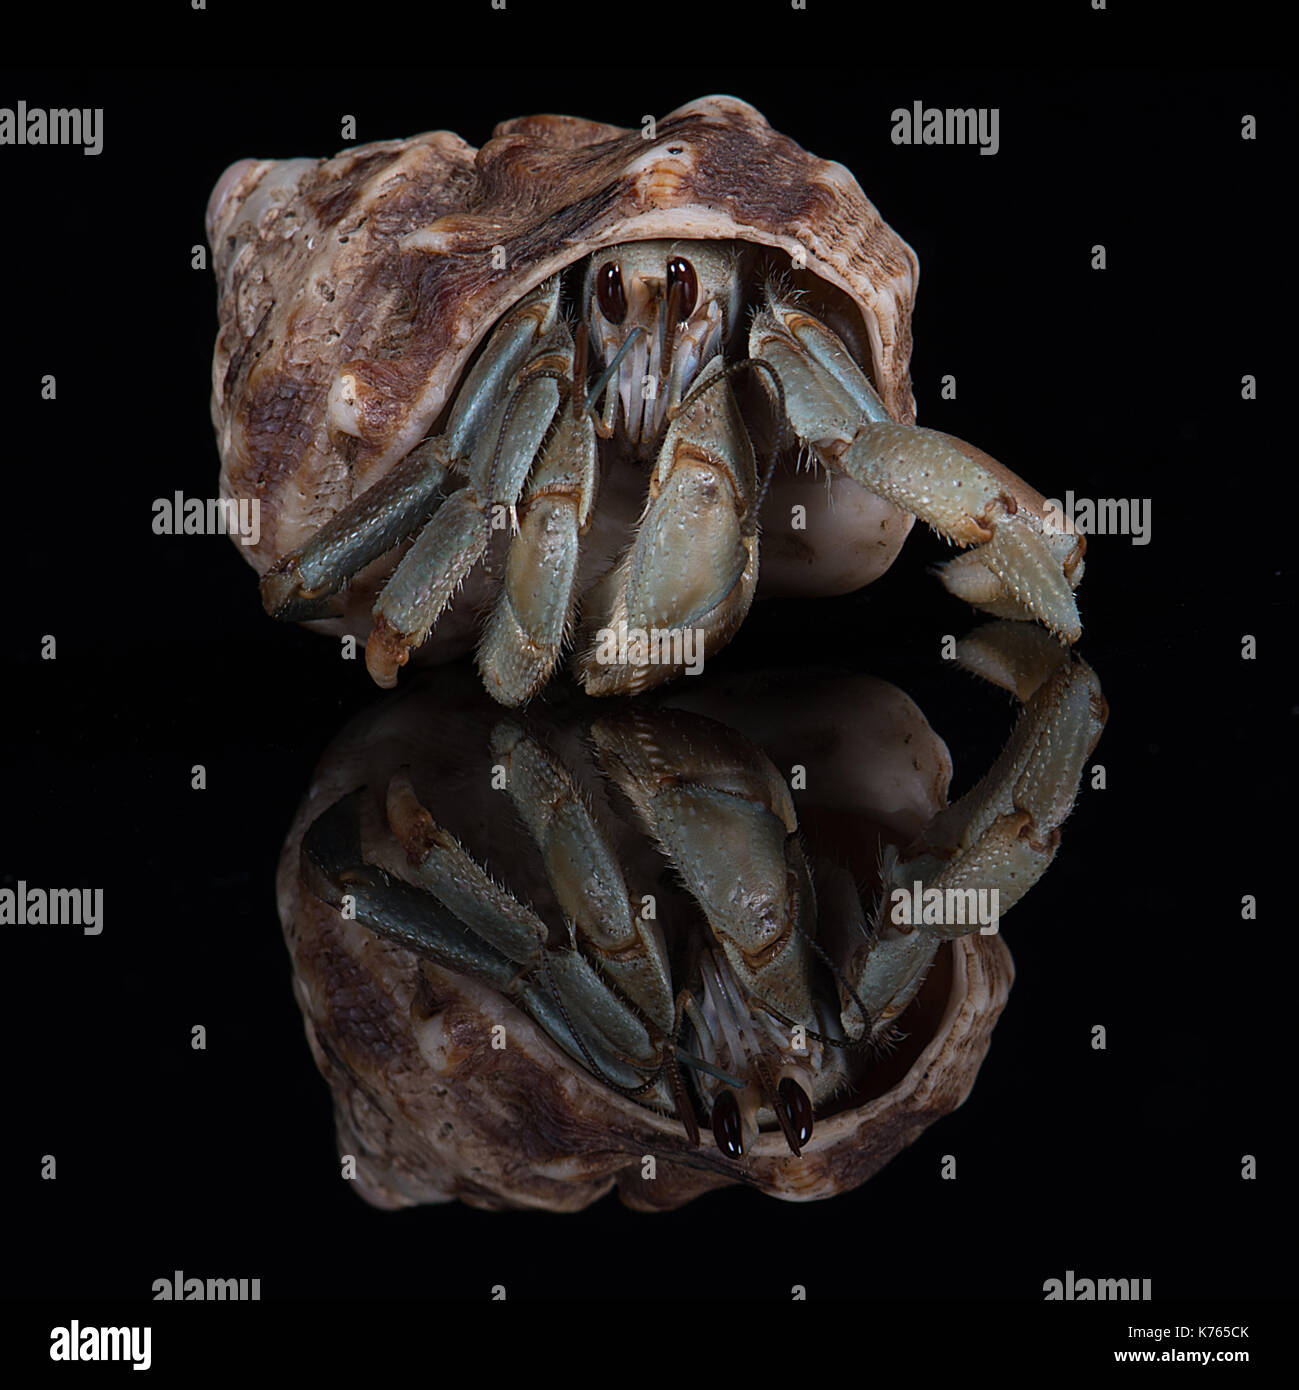 close up square photograph head on of a hermit crab emerging from its host shell with a reflection and black background Stock Photo